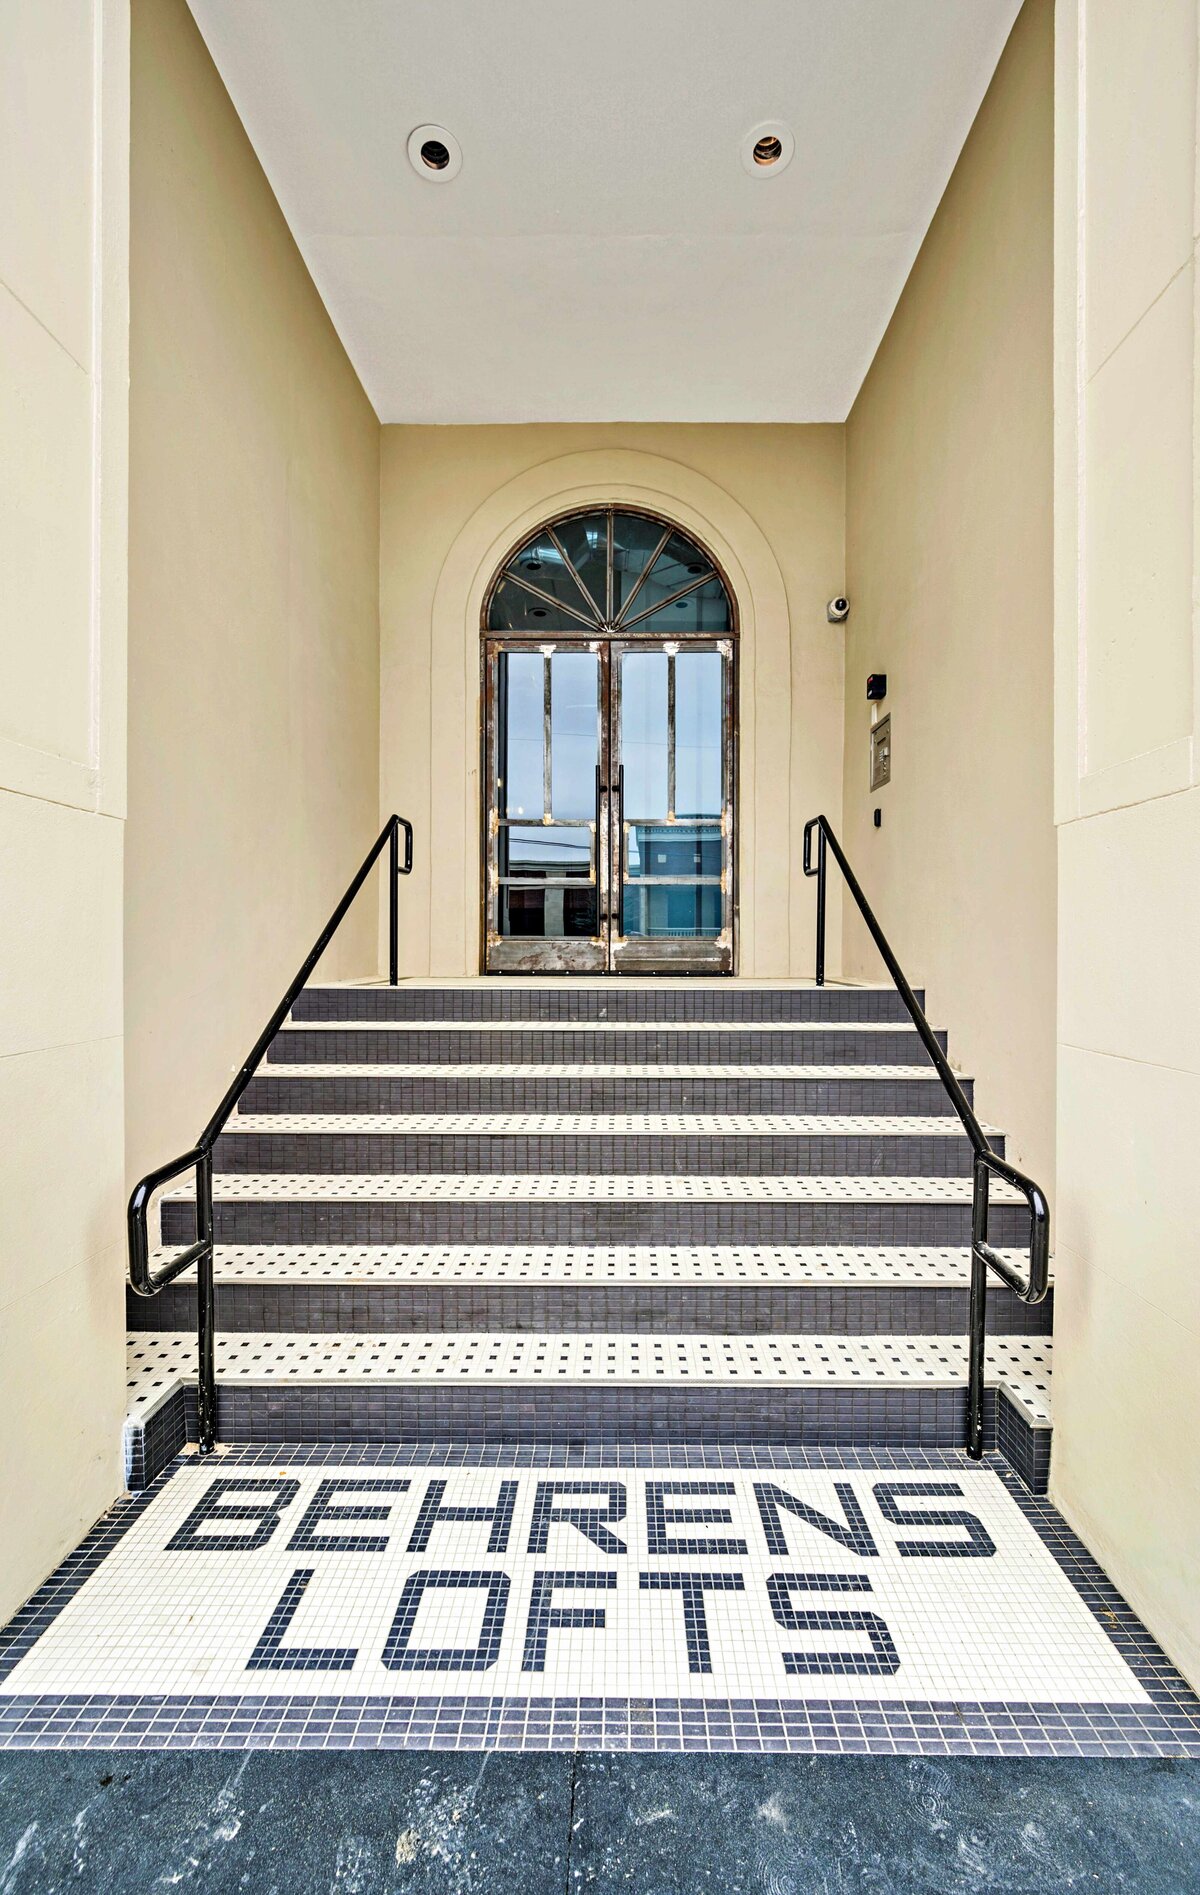 Entrance to the Behrens Lofts building of this one-bedroom, one-bathroom vintage industrial condo with Smart TV, free Wi-Fi, and washer/dryer located in downtown Waco, TX.